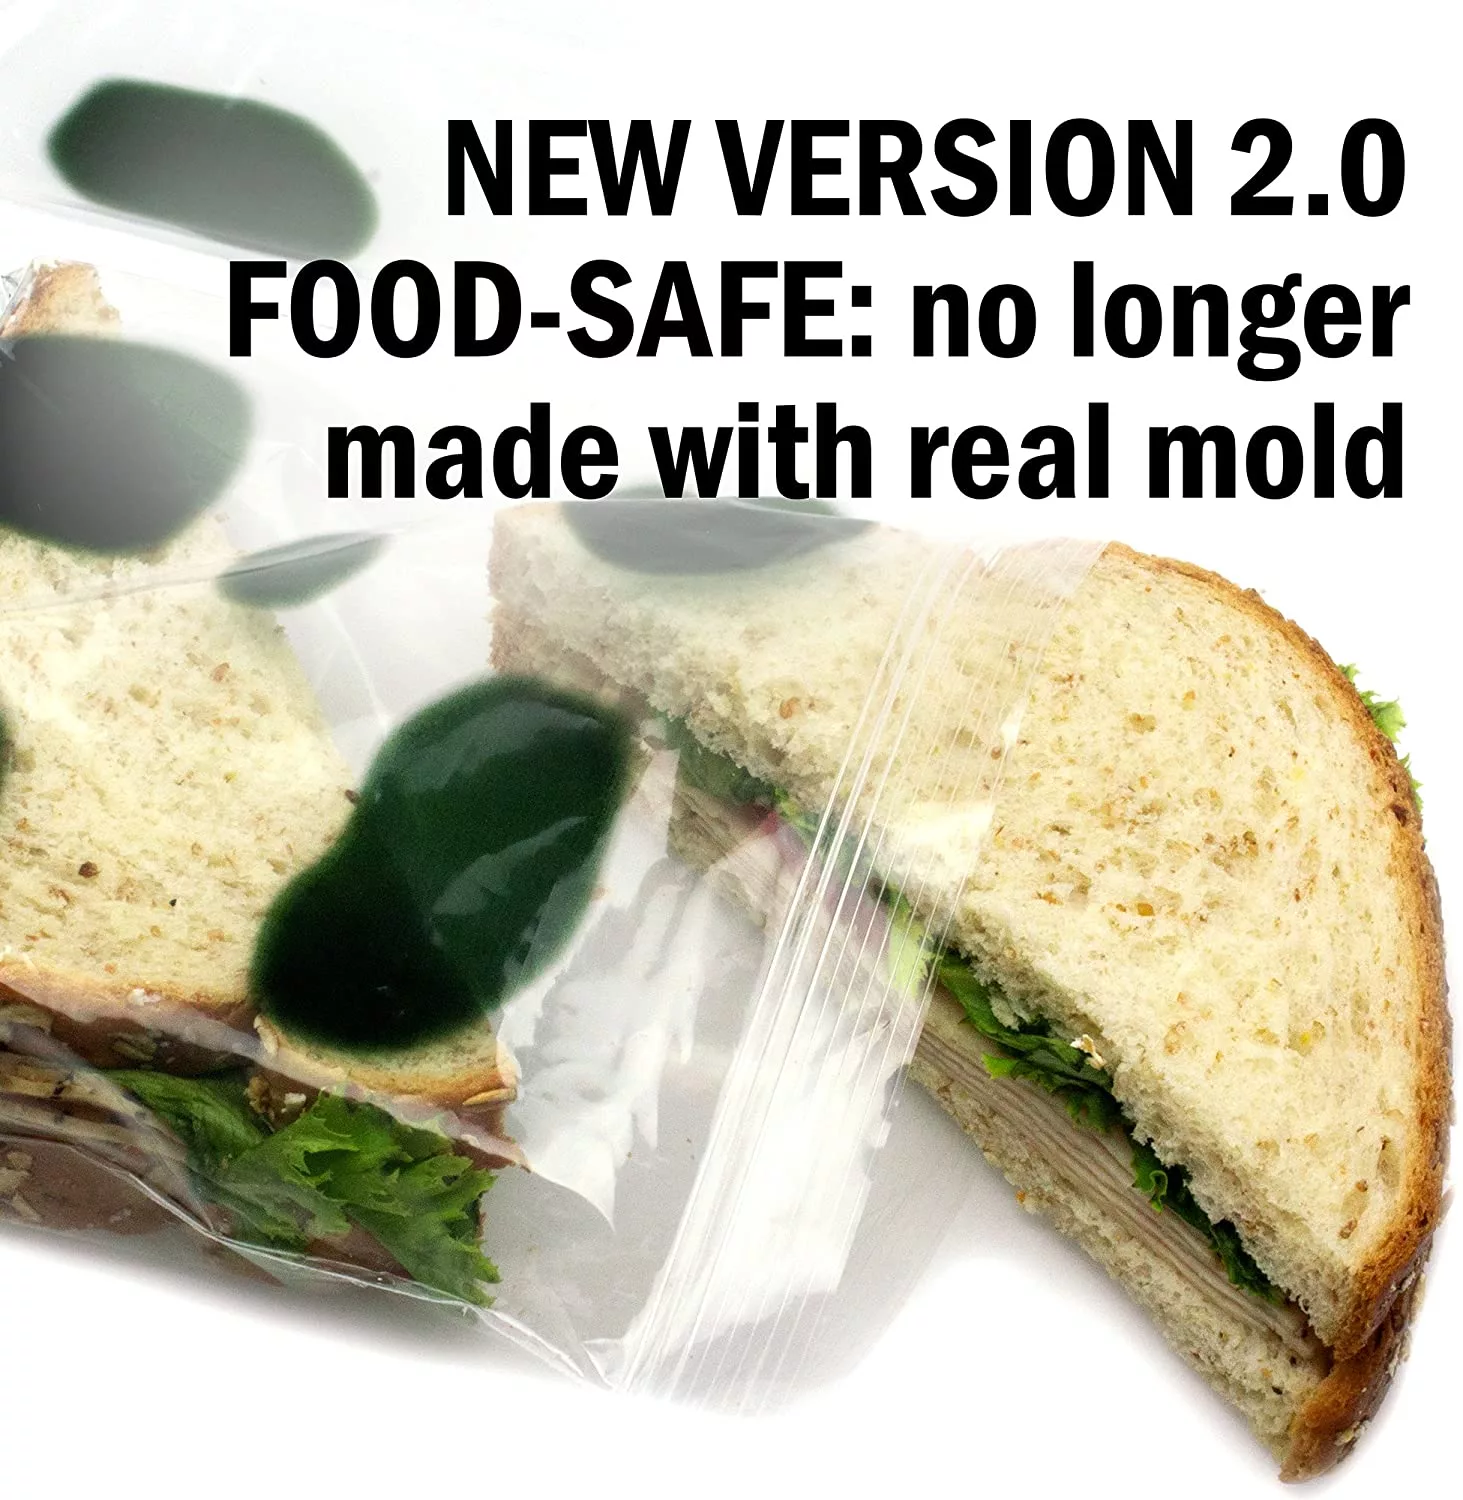 Hands Off Moldy Lunch Bags is no longer made with real mold